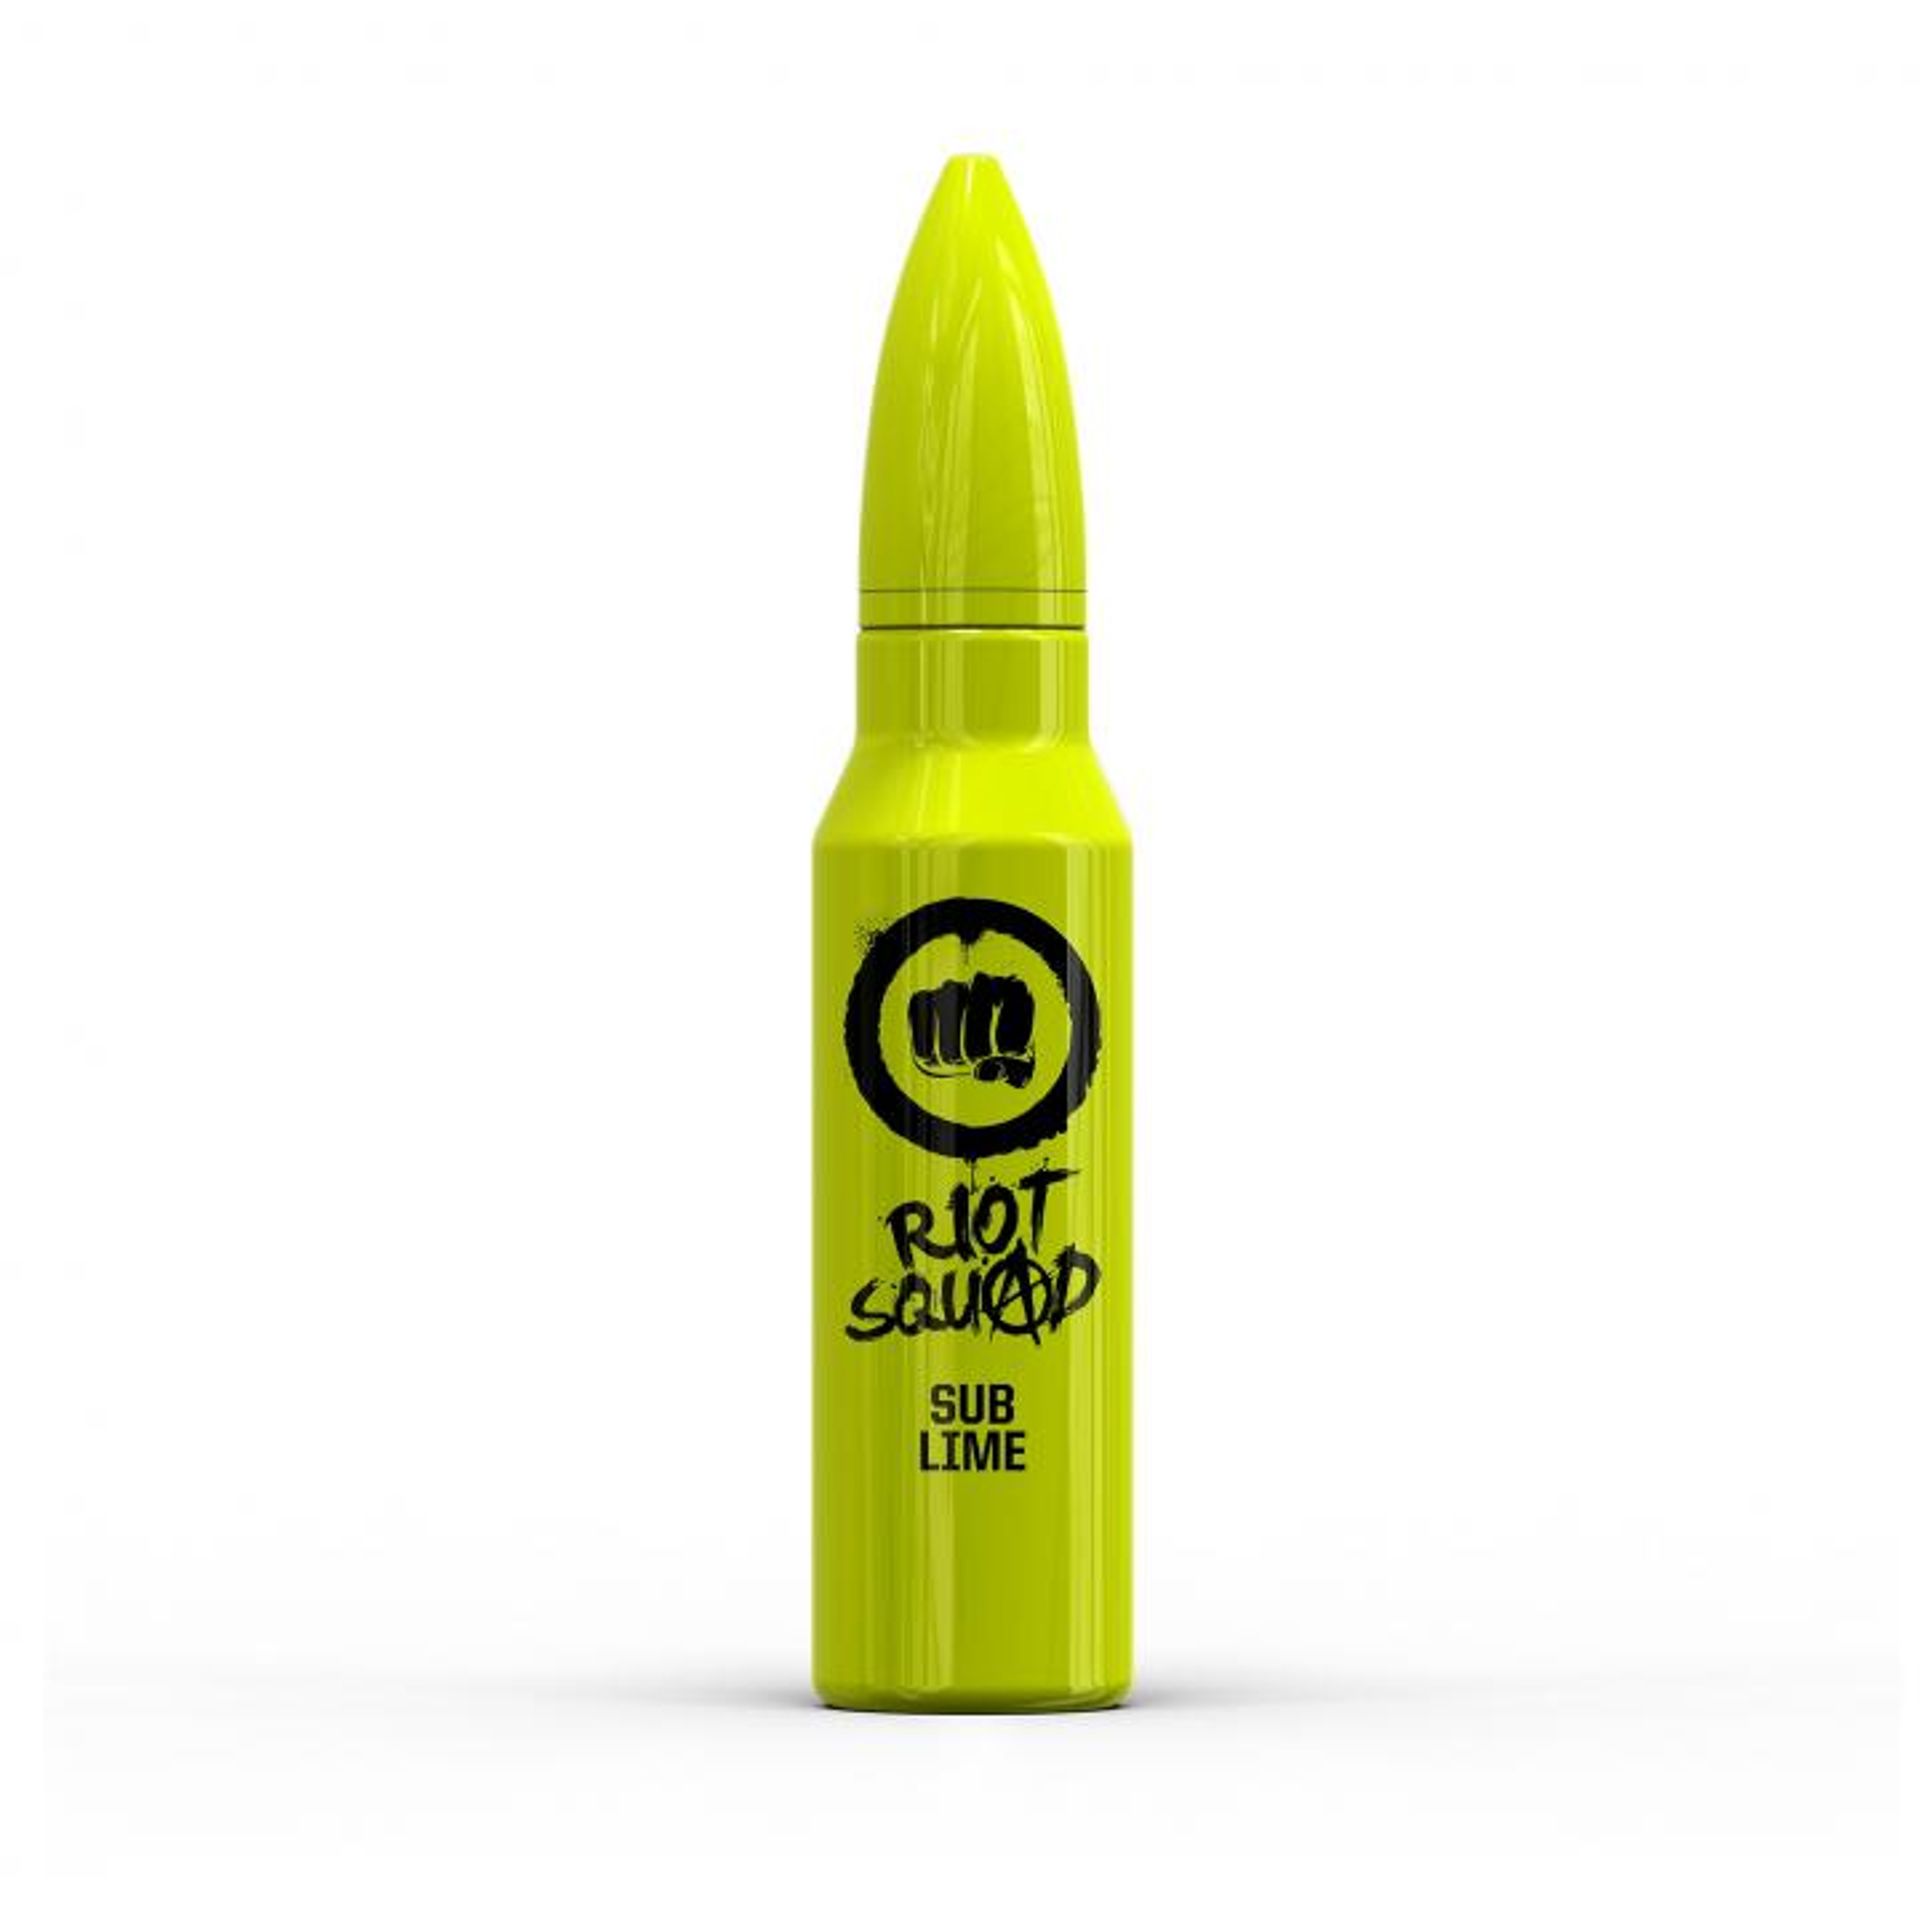 Image of Sub Lime by Riot Squad